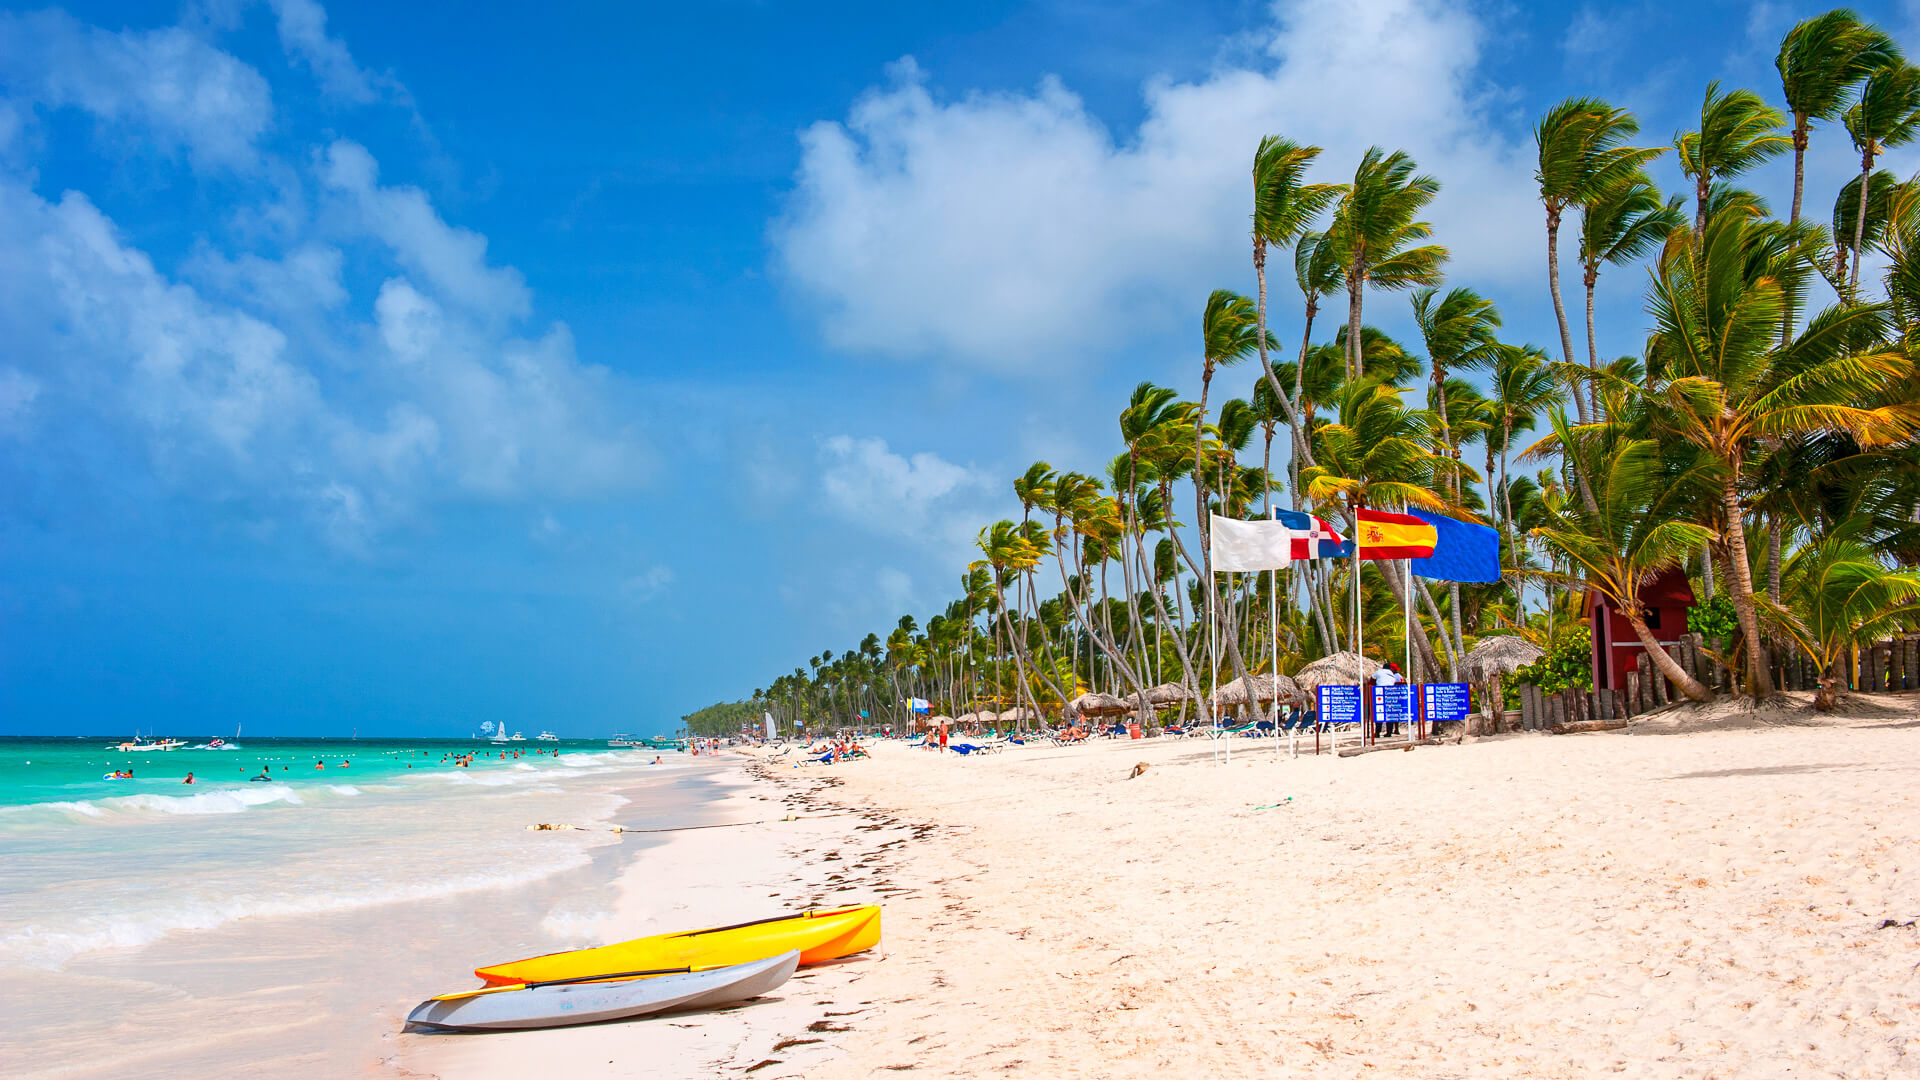 <p>The DR has long been known as an affordable Caribbean destination, but it is now being recognized for luxury as well. Several new resorts in Punta Cana will open this year, including the St. Regis Cap Cana, the Sanctuary Cap Cana, and a new W hotel. Many resorts are all-inclusive, and some only welcome adults.</p> <p><strong>Find Out: <a href="https://www.gobankingrates.com/saving-money/travel/cheap-beautiful-places-for-winter-vacation/?utm_term=related_link_6&utm_campaign=1264892&utm_source=msn.com&utm_content=7&utm_medium=rss" rel="">7 Cheap, Beautiful Places for a Winter Vacation</a></strong></p>